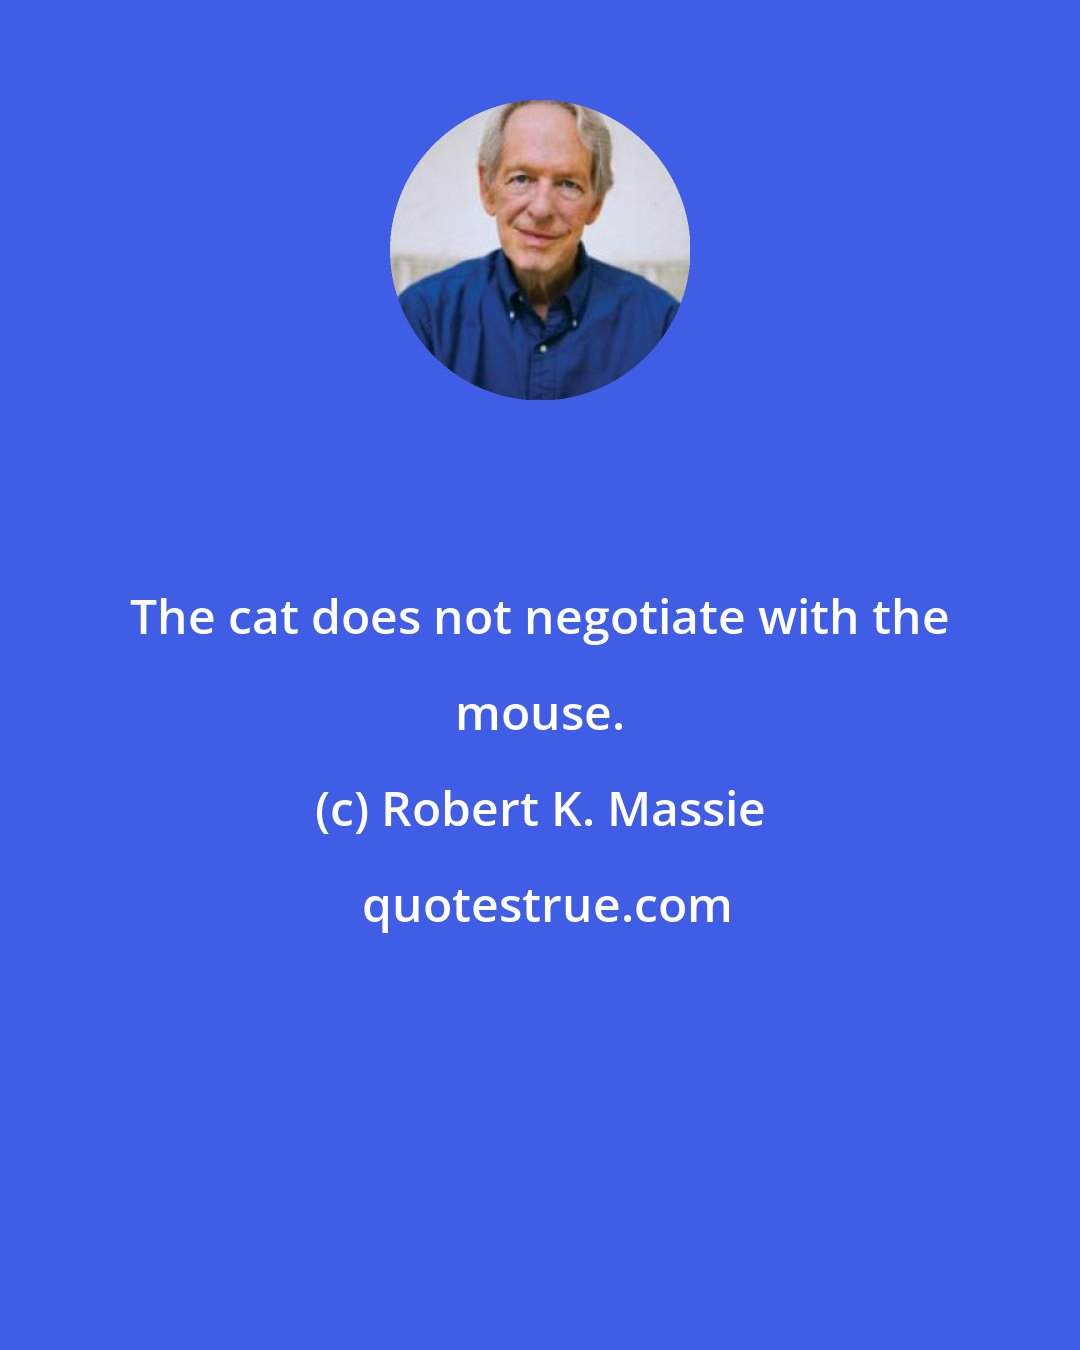 Robert K. Massie: The cat does not negotiate with the mouse.